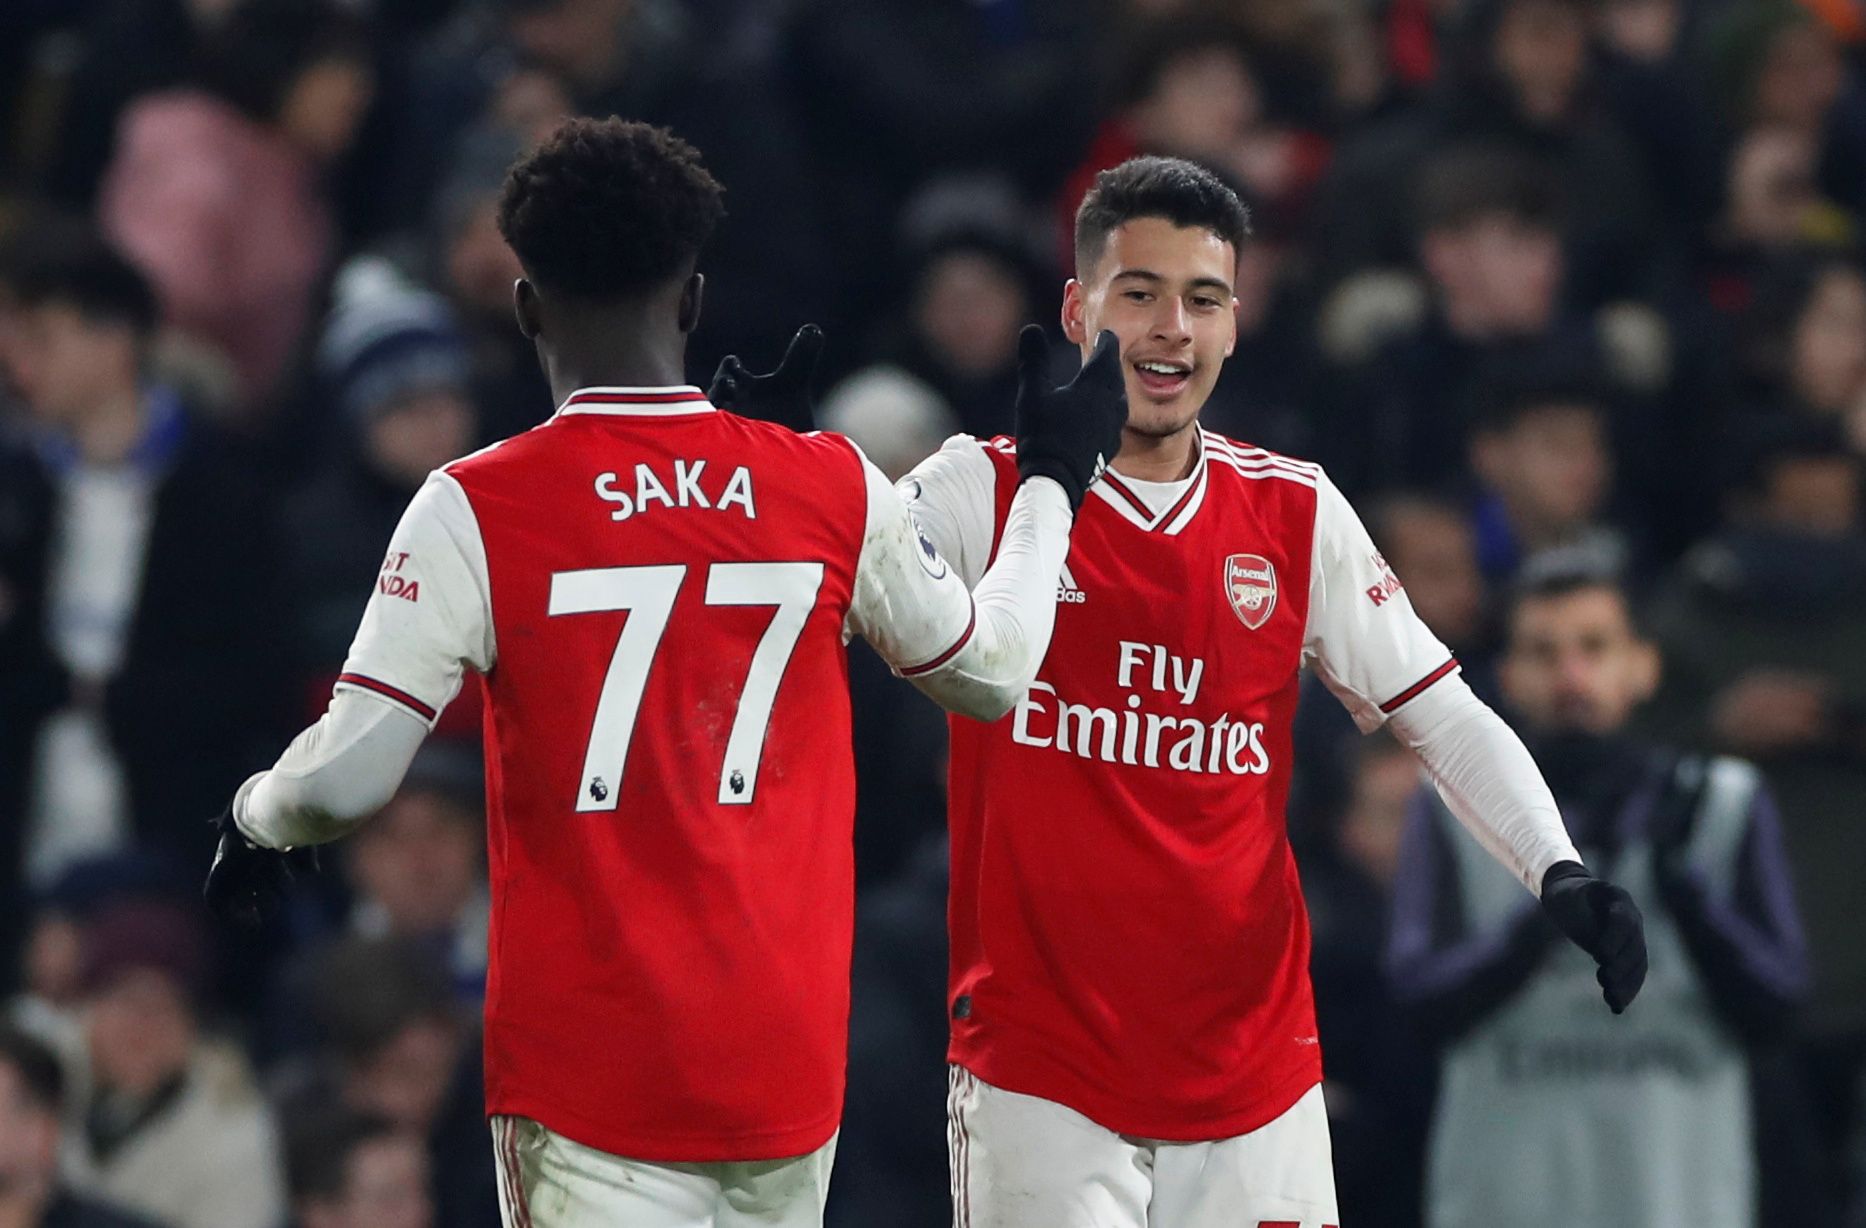 Soccer Football - Premier League - Chelsea v Arsenal - Stamford Bridge, London, Britain - January 21, 2020  Arsenal's Gabriel Martinelli celebrates scoring their first goal with Bukayo Saka   Action Images via Reuters/Paul Childs  EDITORIAL USE ONLY. No use with unauthorized audio, video, data, fixture lists, club/league logos or 